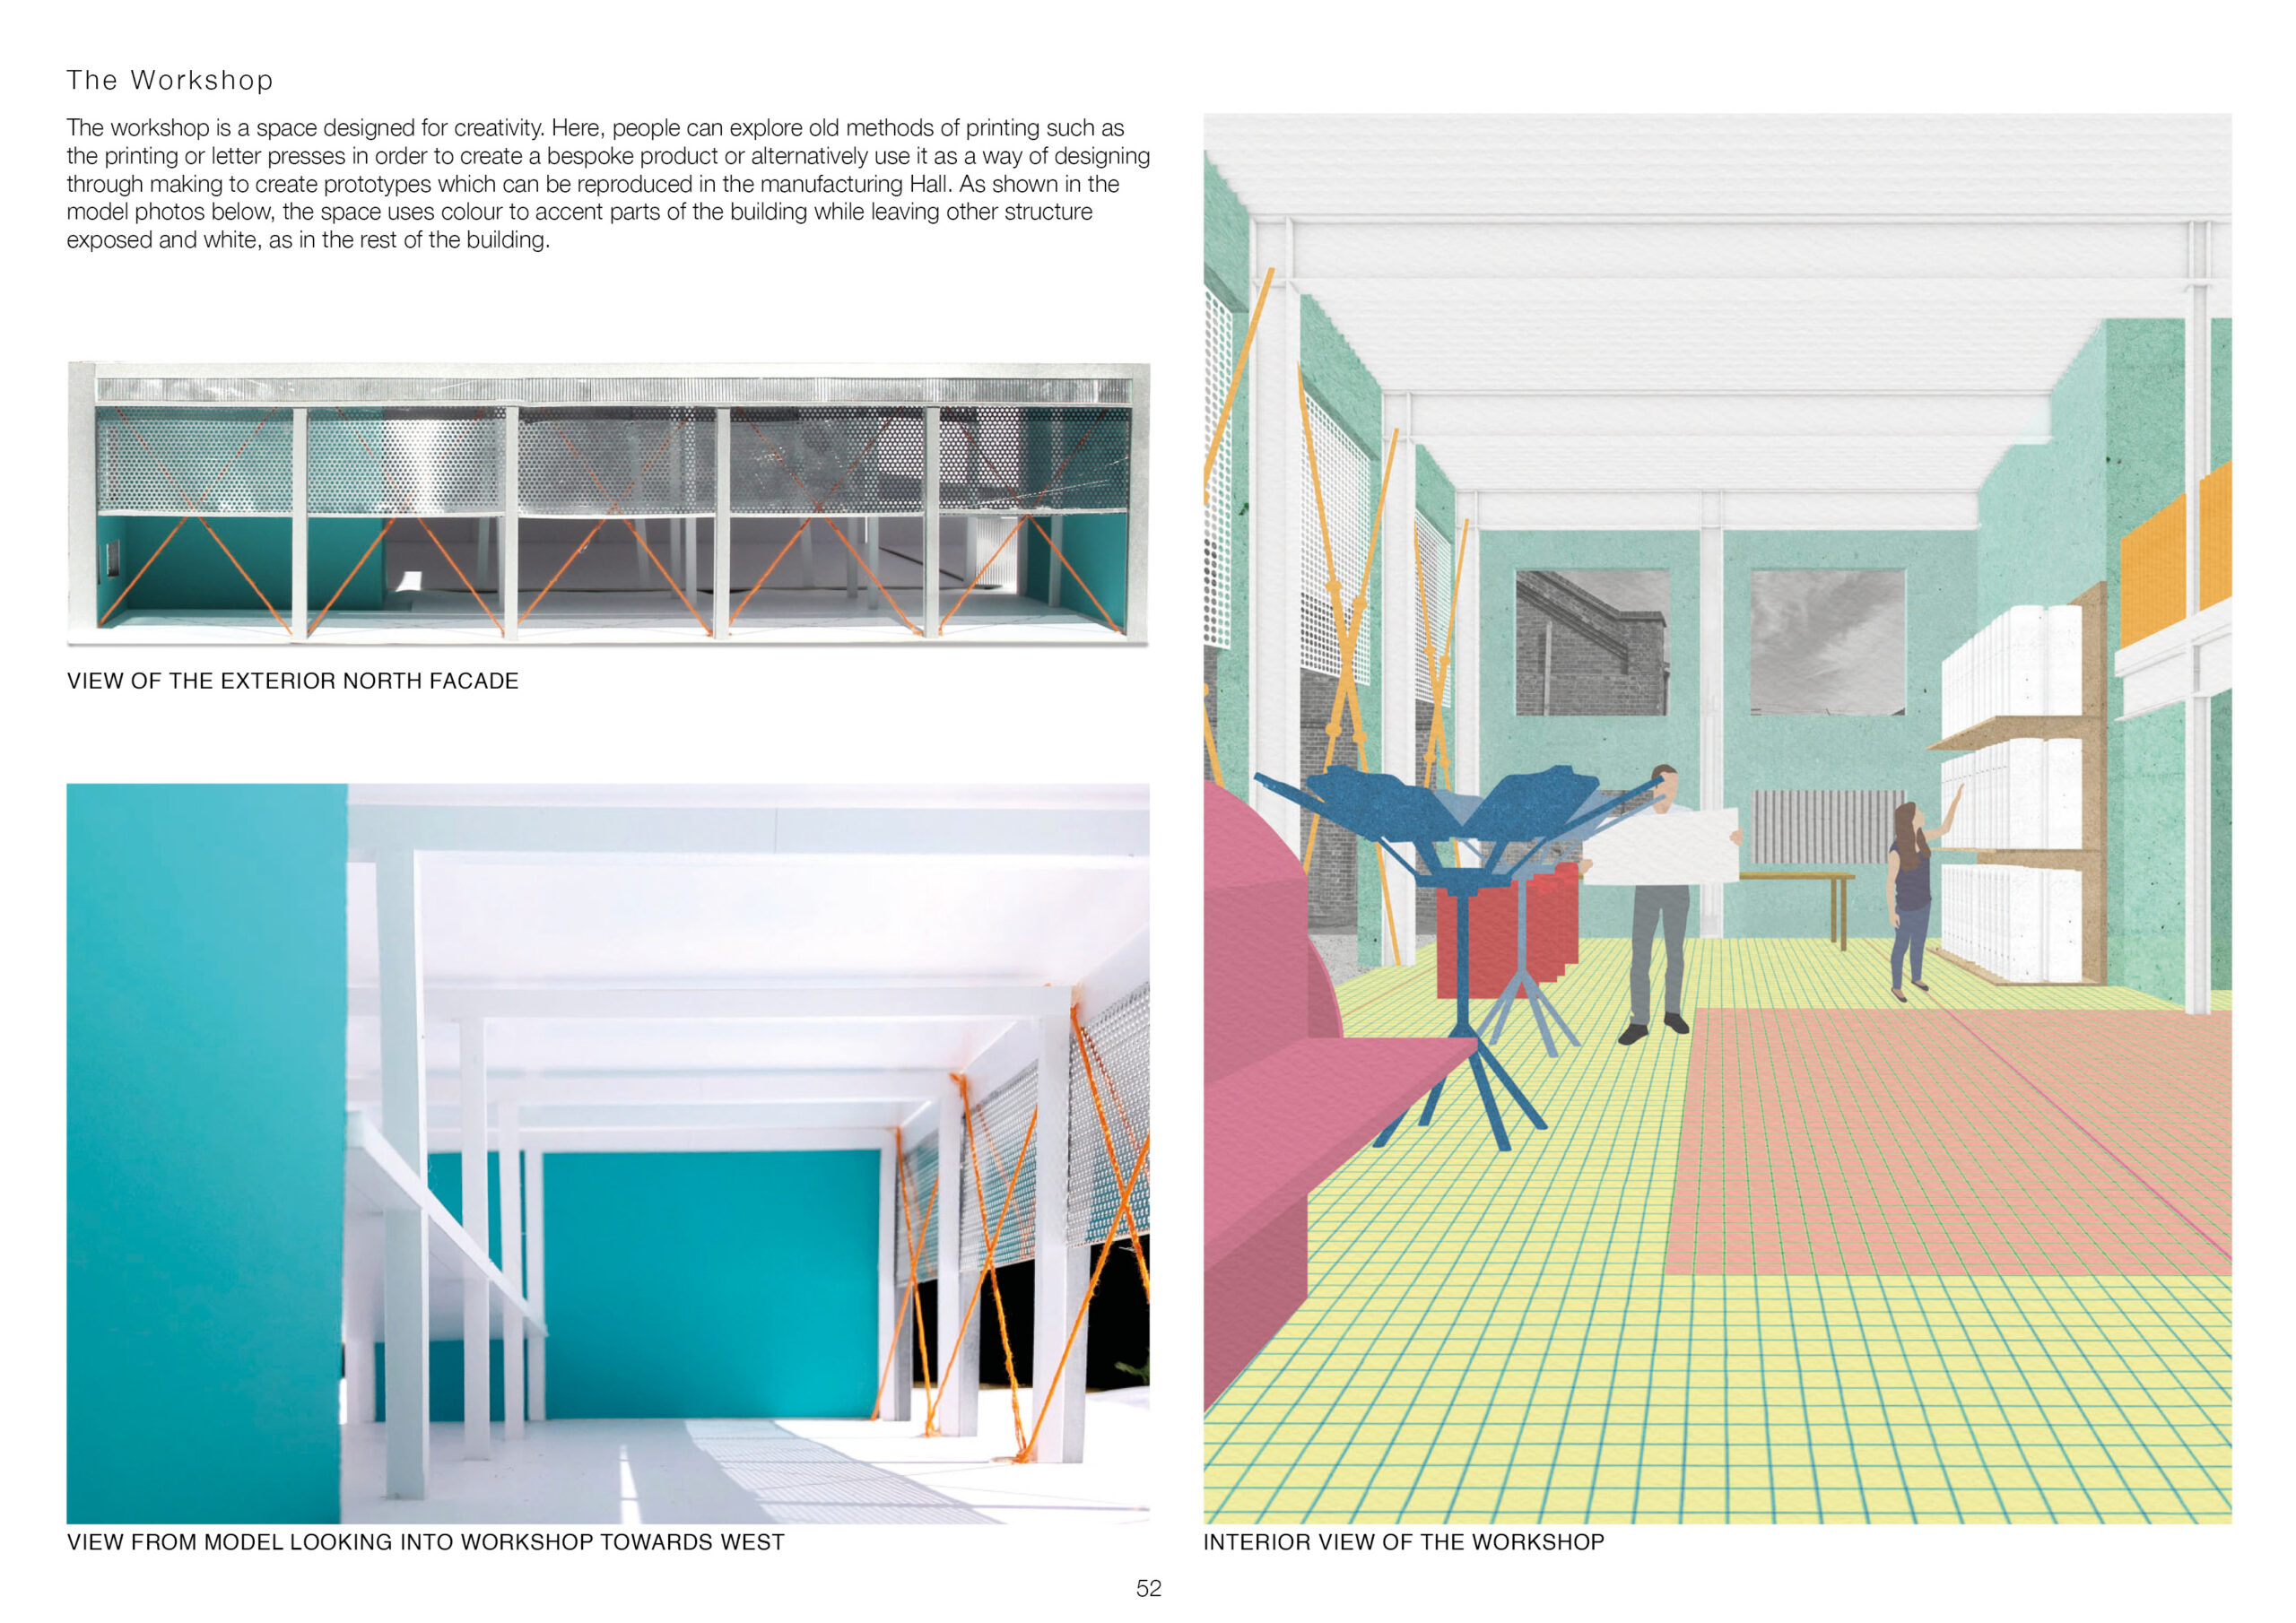 this page illustrates the workshop, it has turquoise walls  and white structure and orange bracing. This has been shown in a render and model images